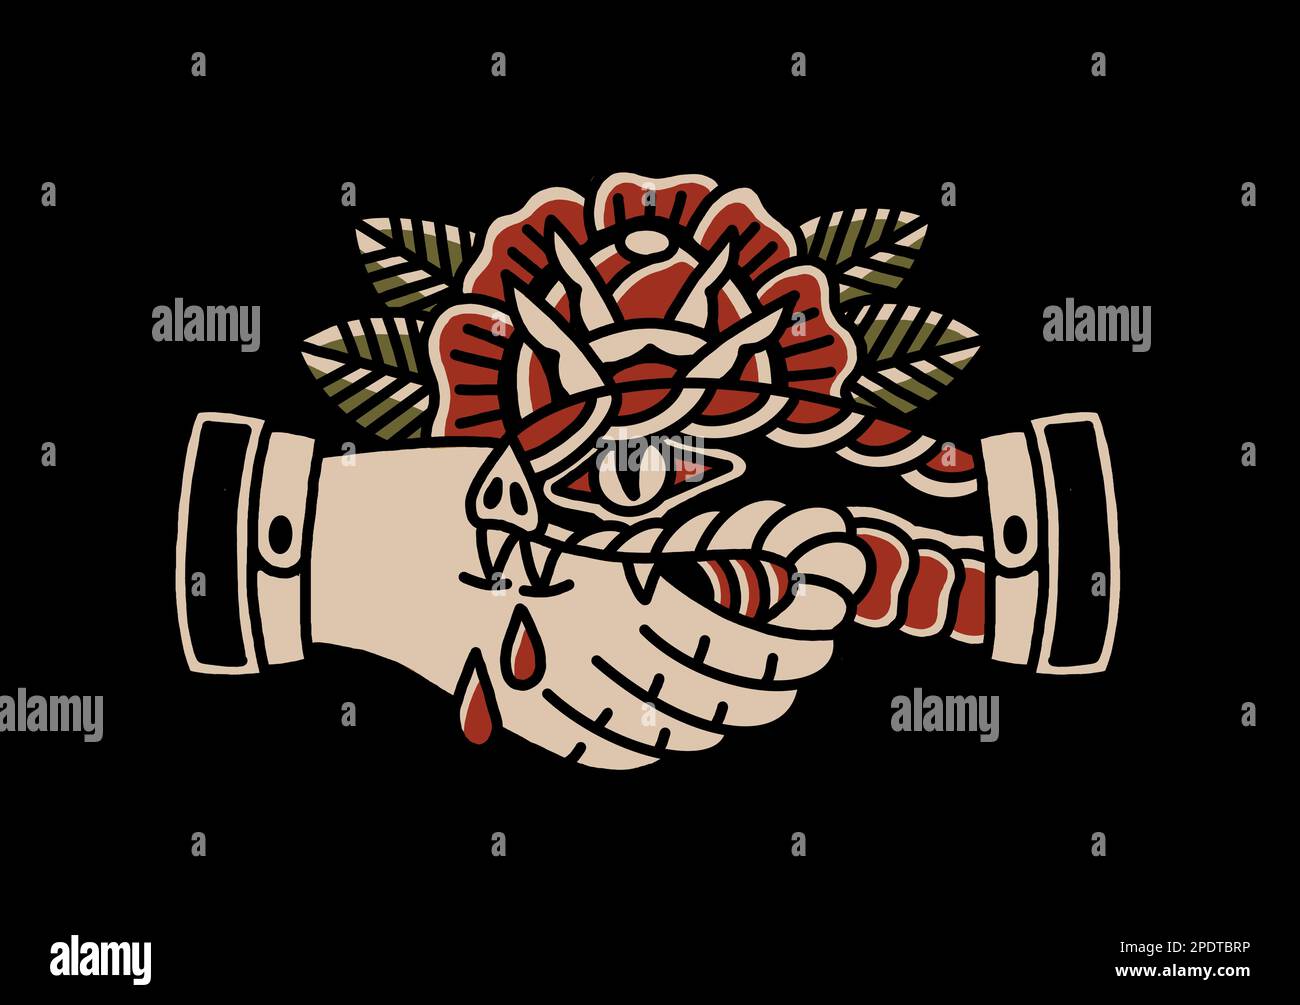 Old school traditional tattoo inspired graphic design handshake with snake bite and rose on black background, Trust no one Stock Photo